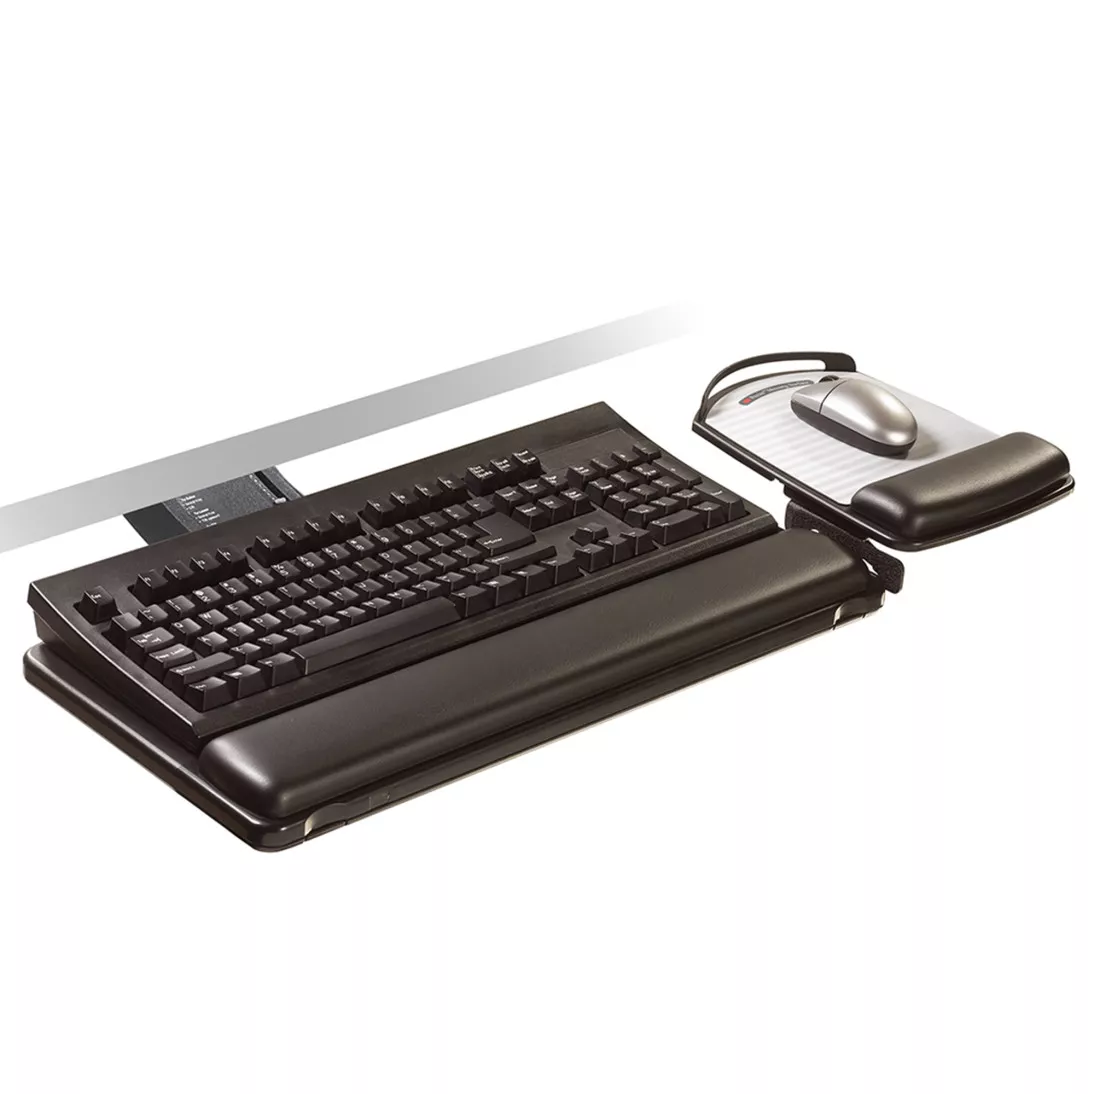 3M™ Sit/Stand Easy Adjust Keyboard Tray with Adjustable Keyboard and
Mouse Platform, 23 in Track, AKT180LE